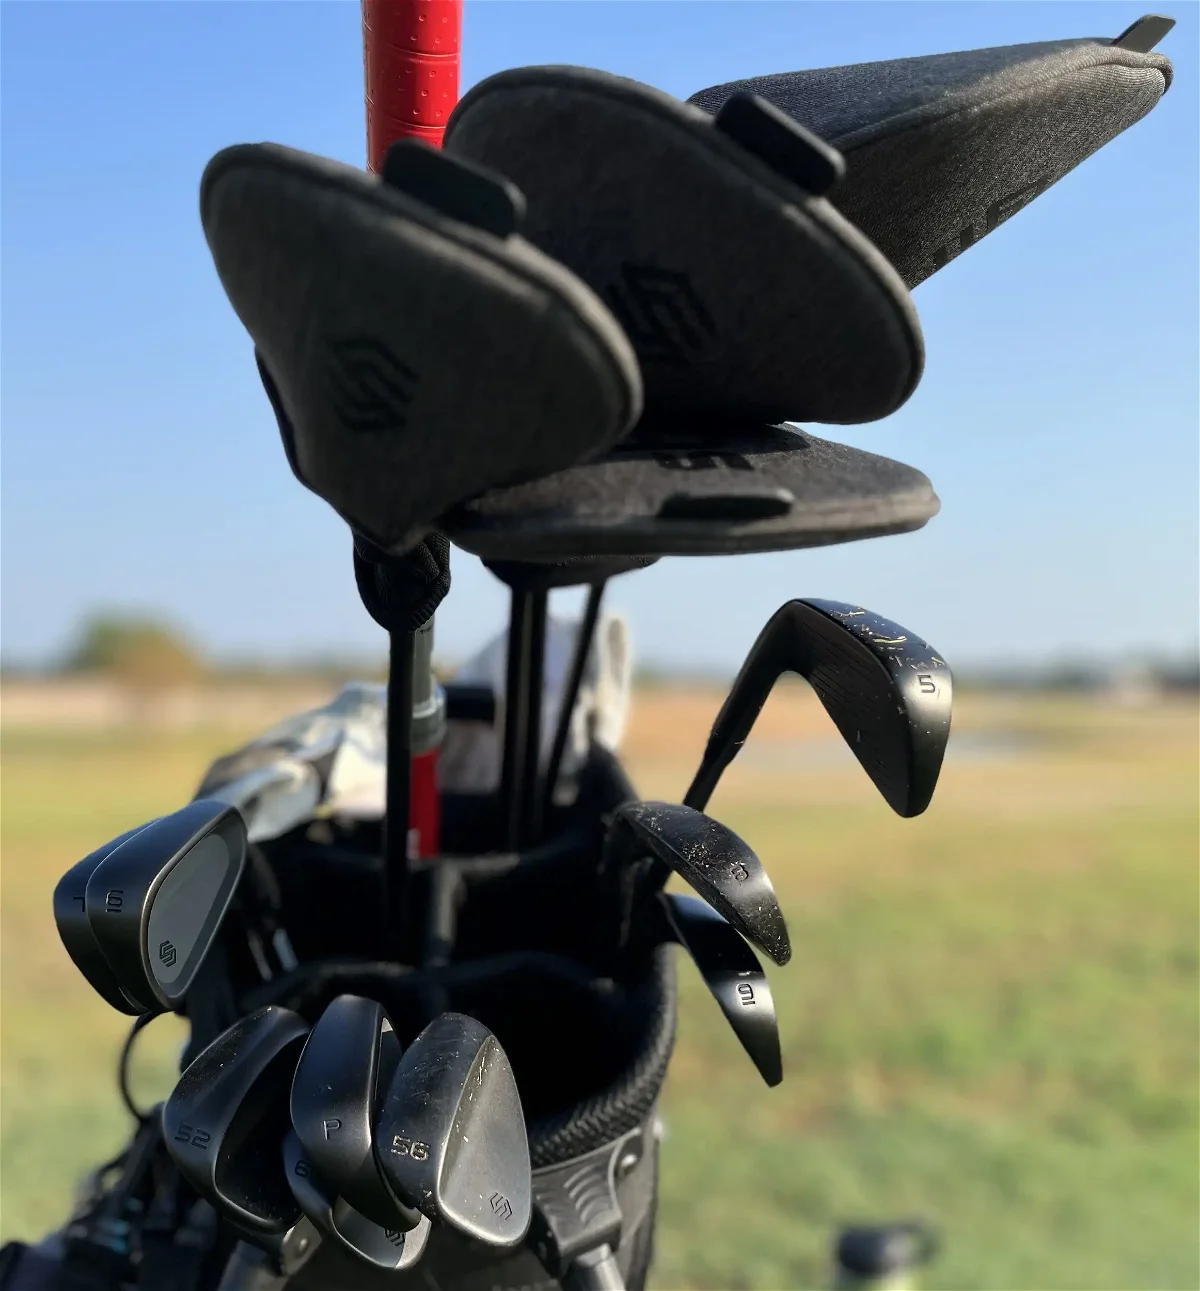 Stix Golf Clubs Review | Should You Believe The Hype?